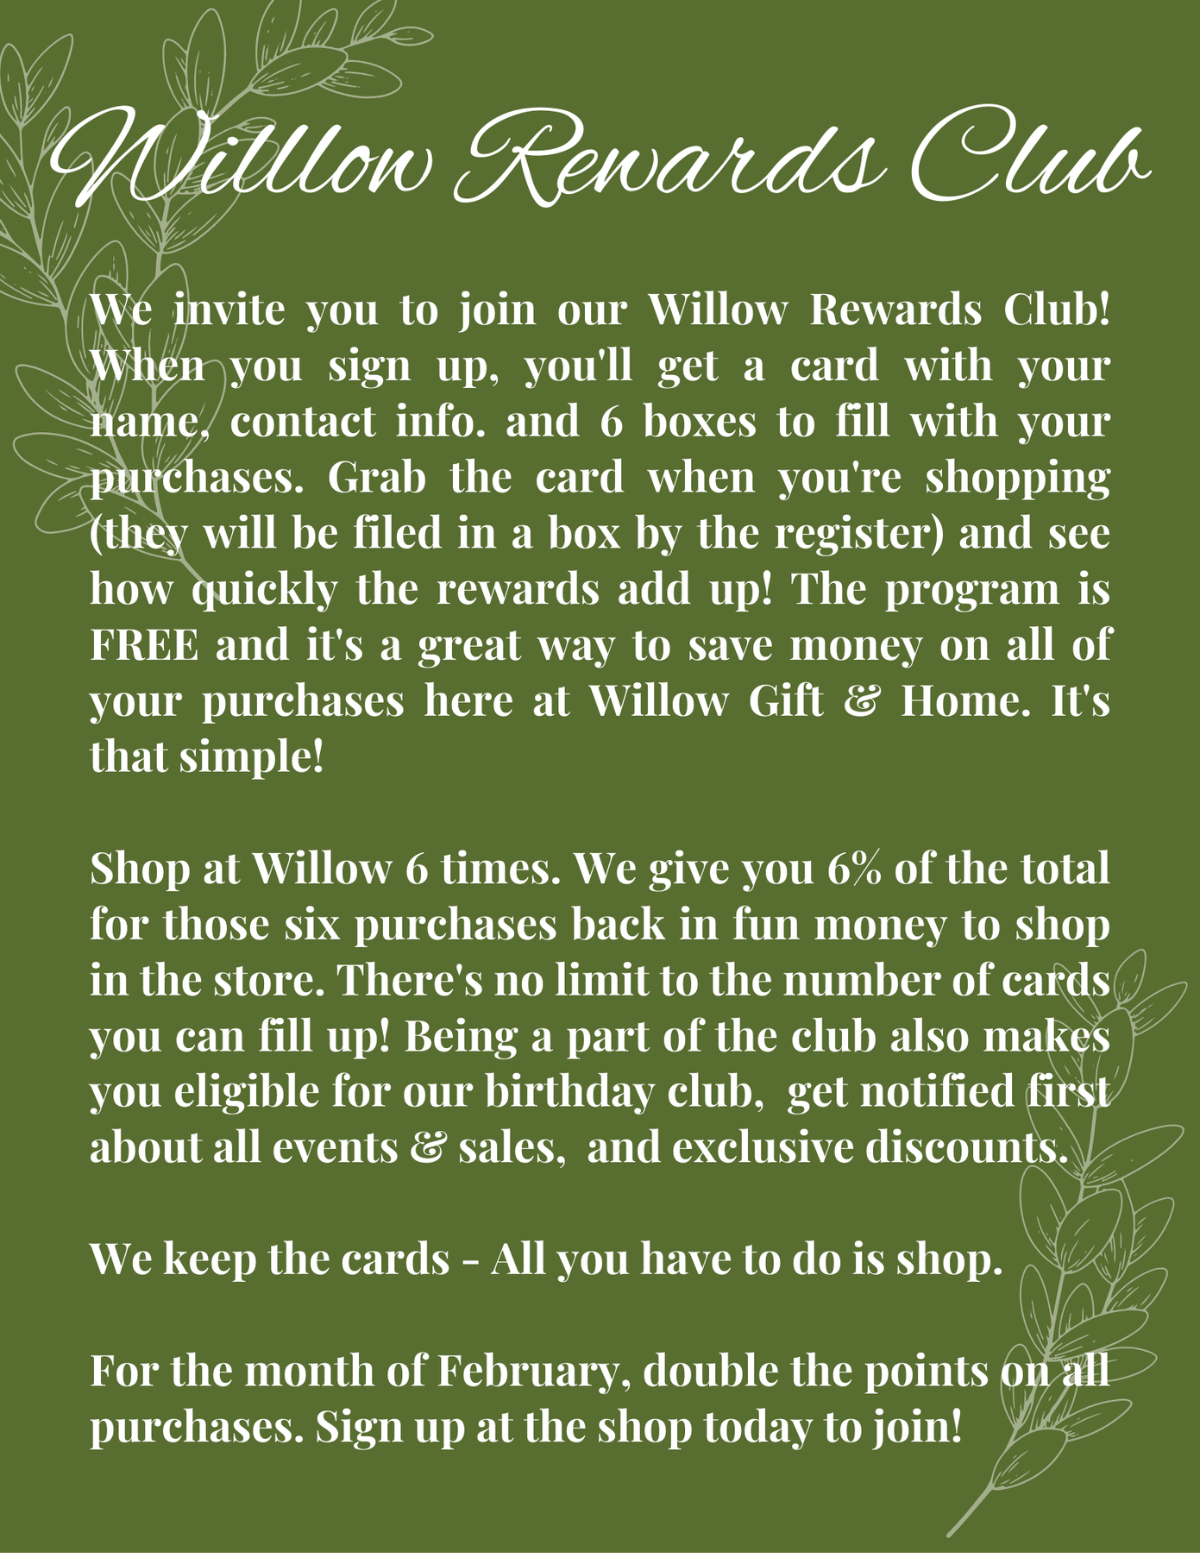 Join Willow Rewards Club